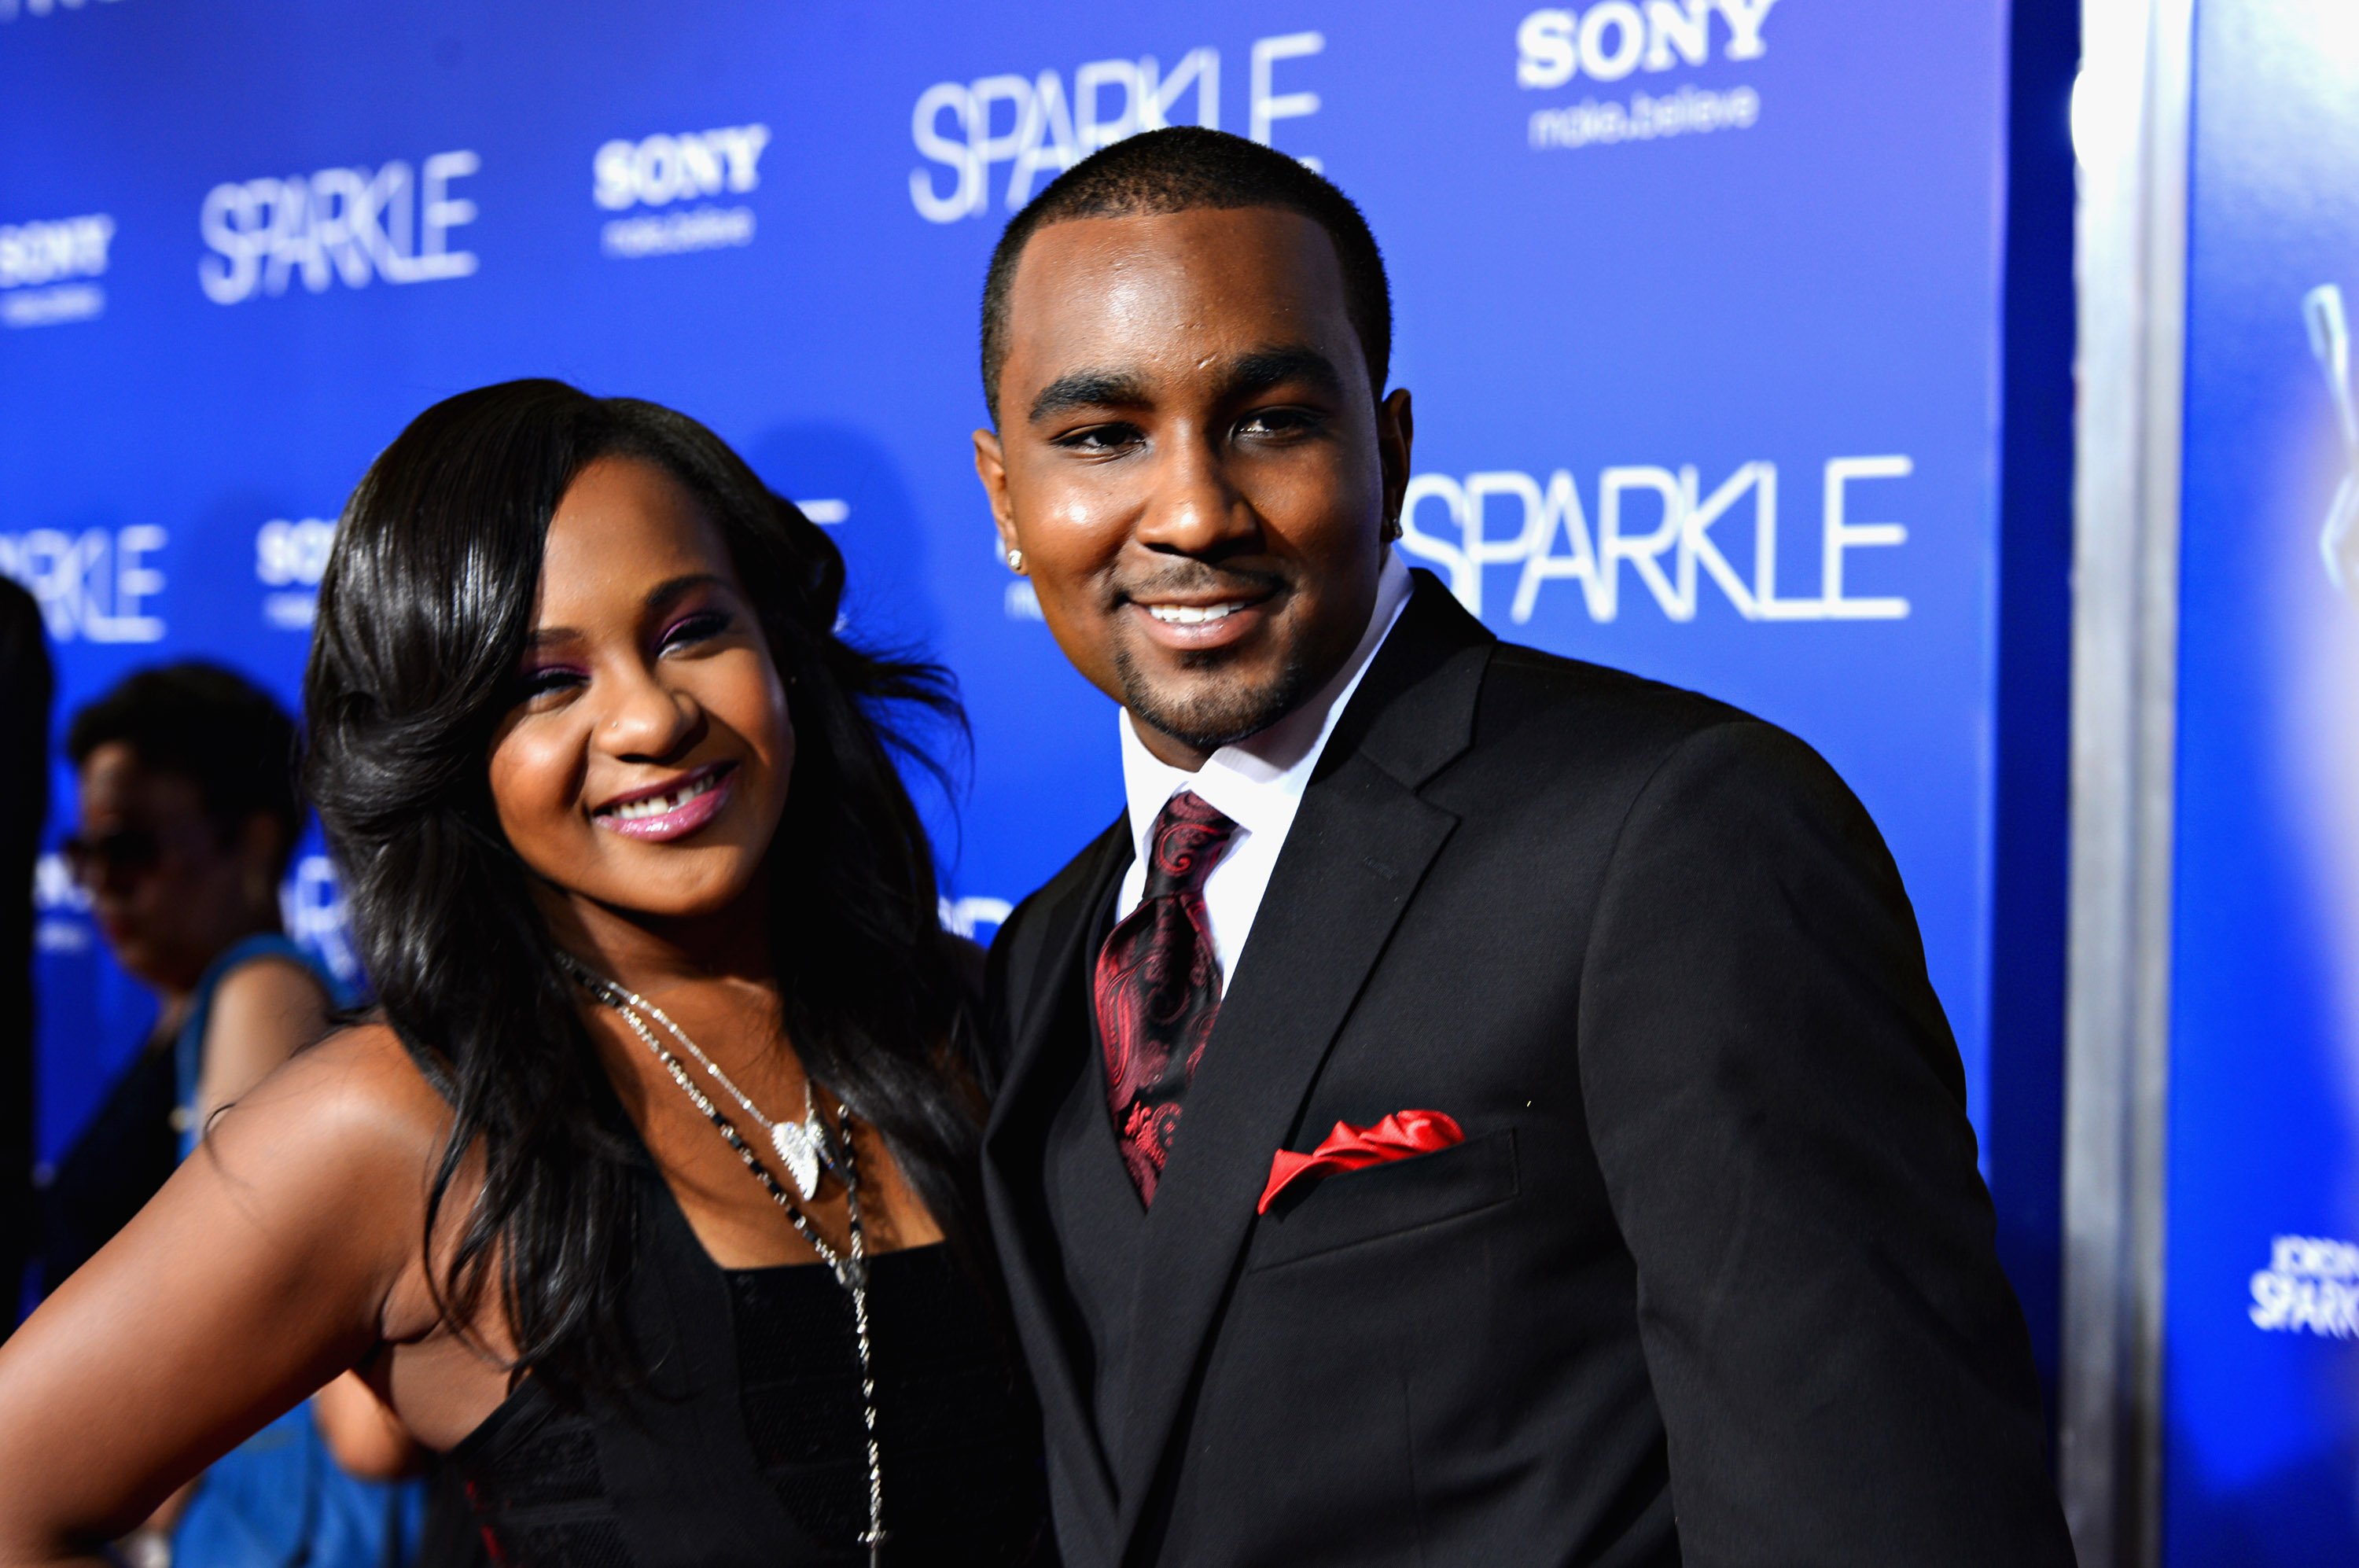 Bobbi Kristina Brown and Nick Gordon at Grauman's Chinese Theatre on August 16, 2012. | Source: Getty Images